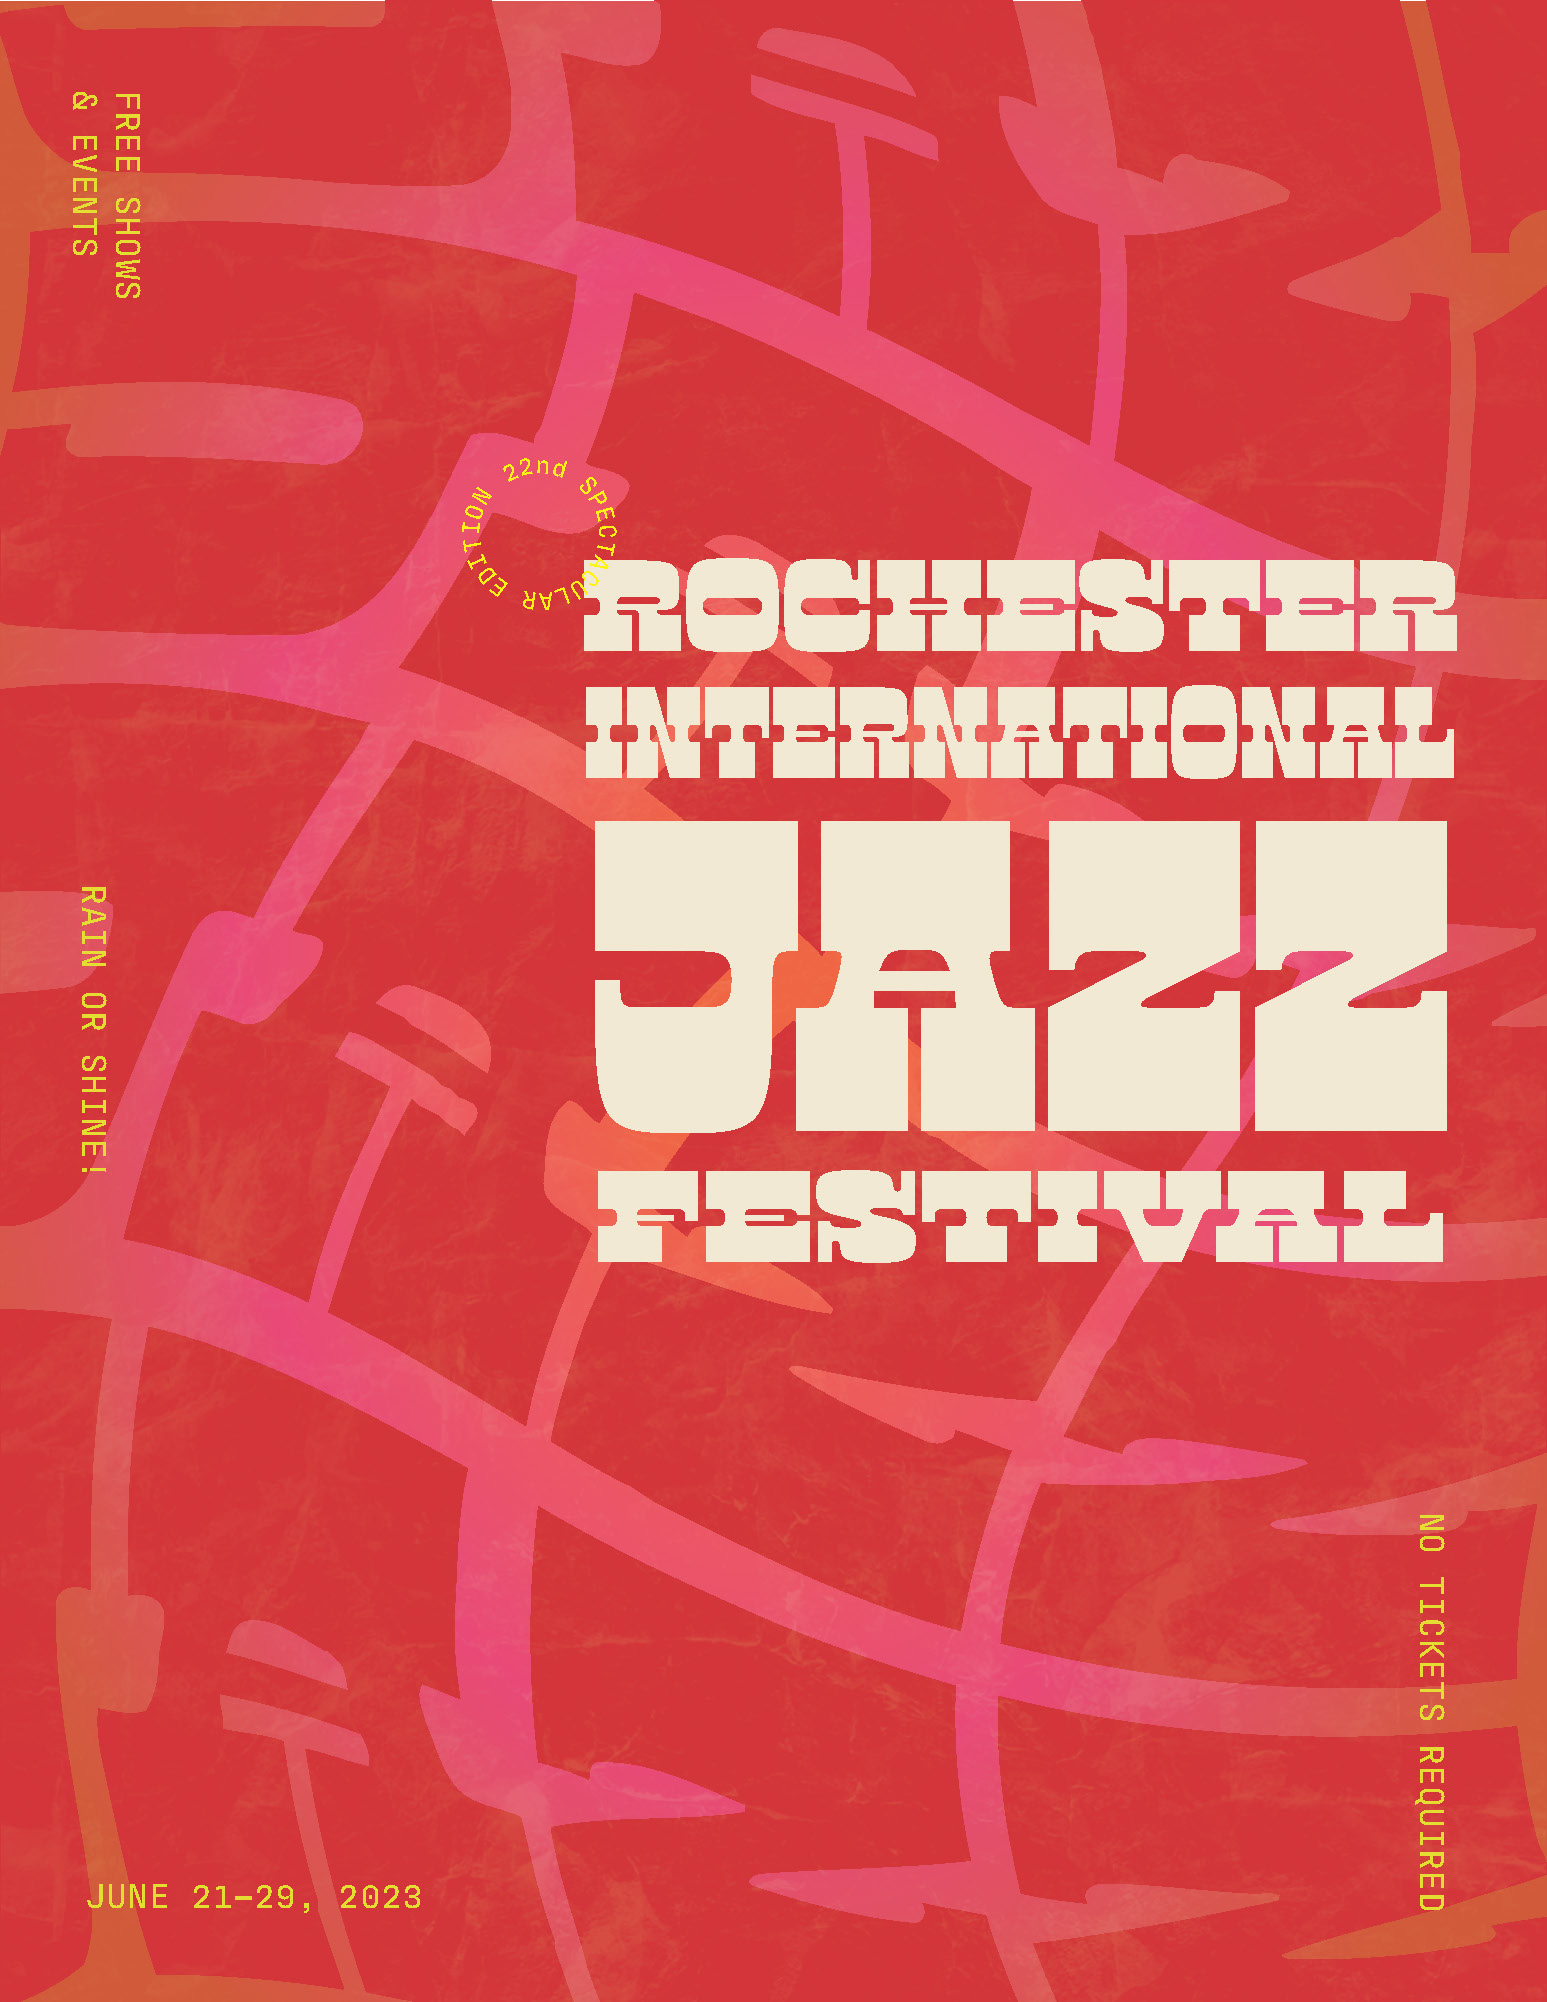 A brochure cover of the Rochester Jazz Fest.